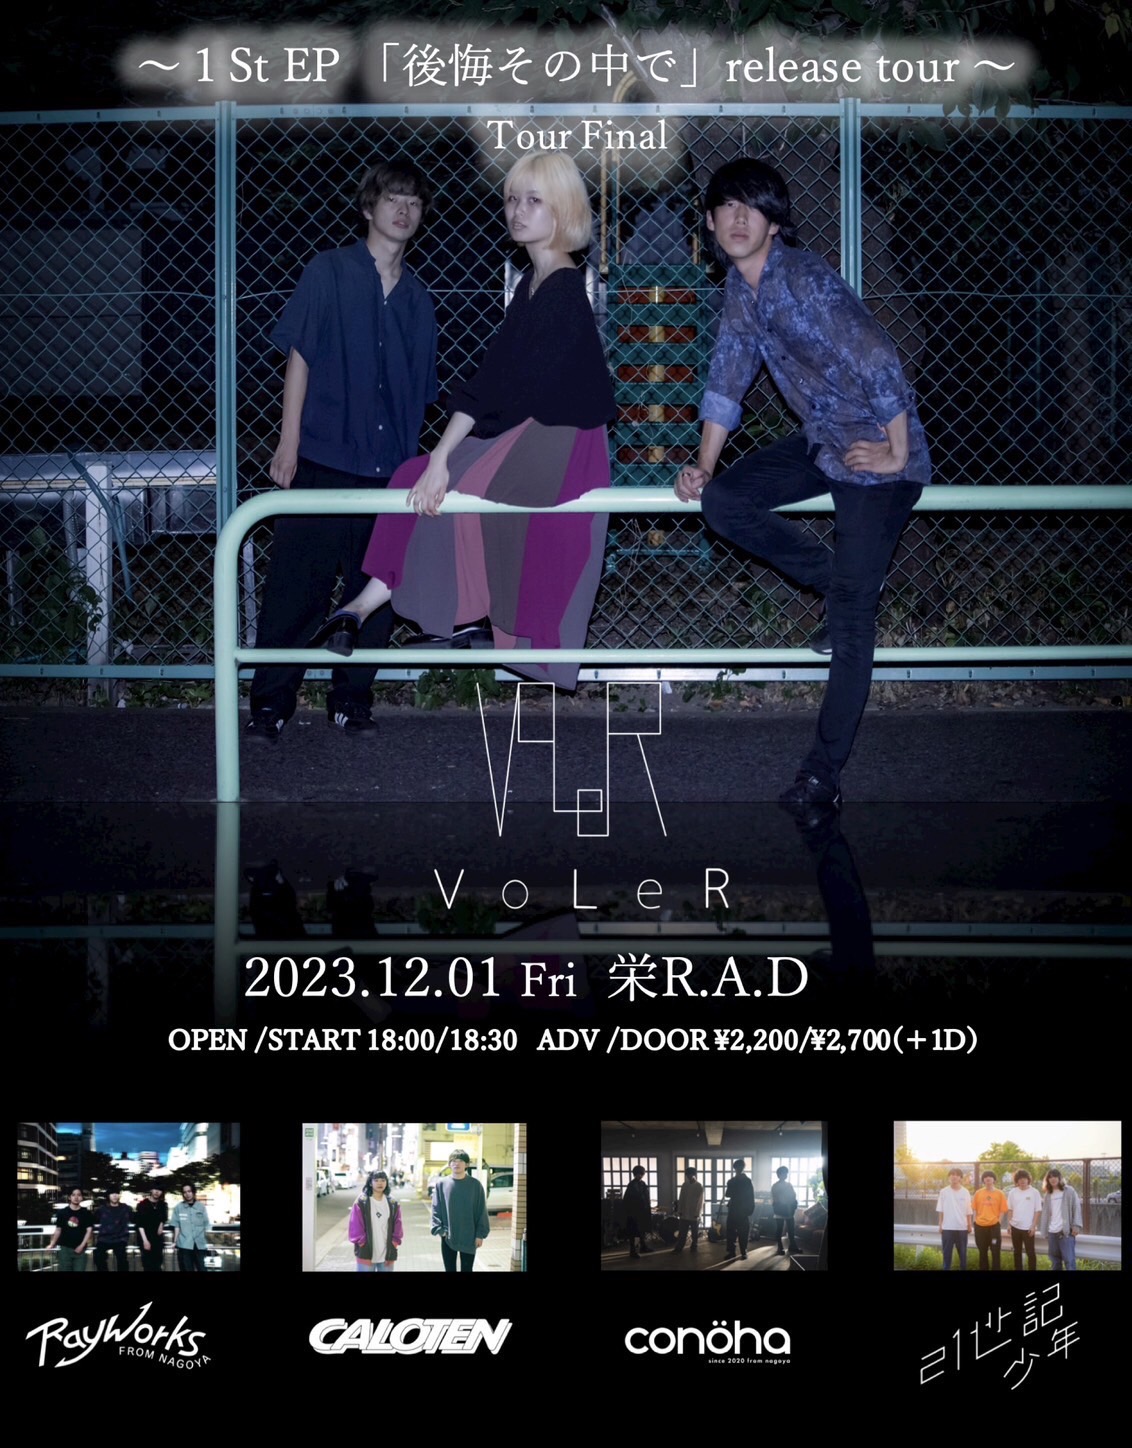 VoLeR 1st EP 後悔その中で release tour FINAL